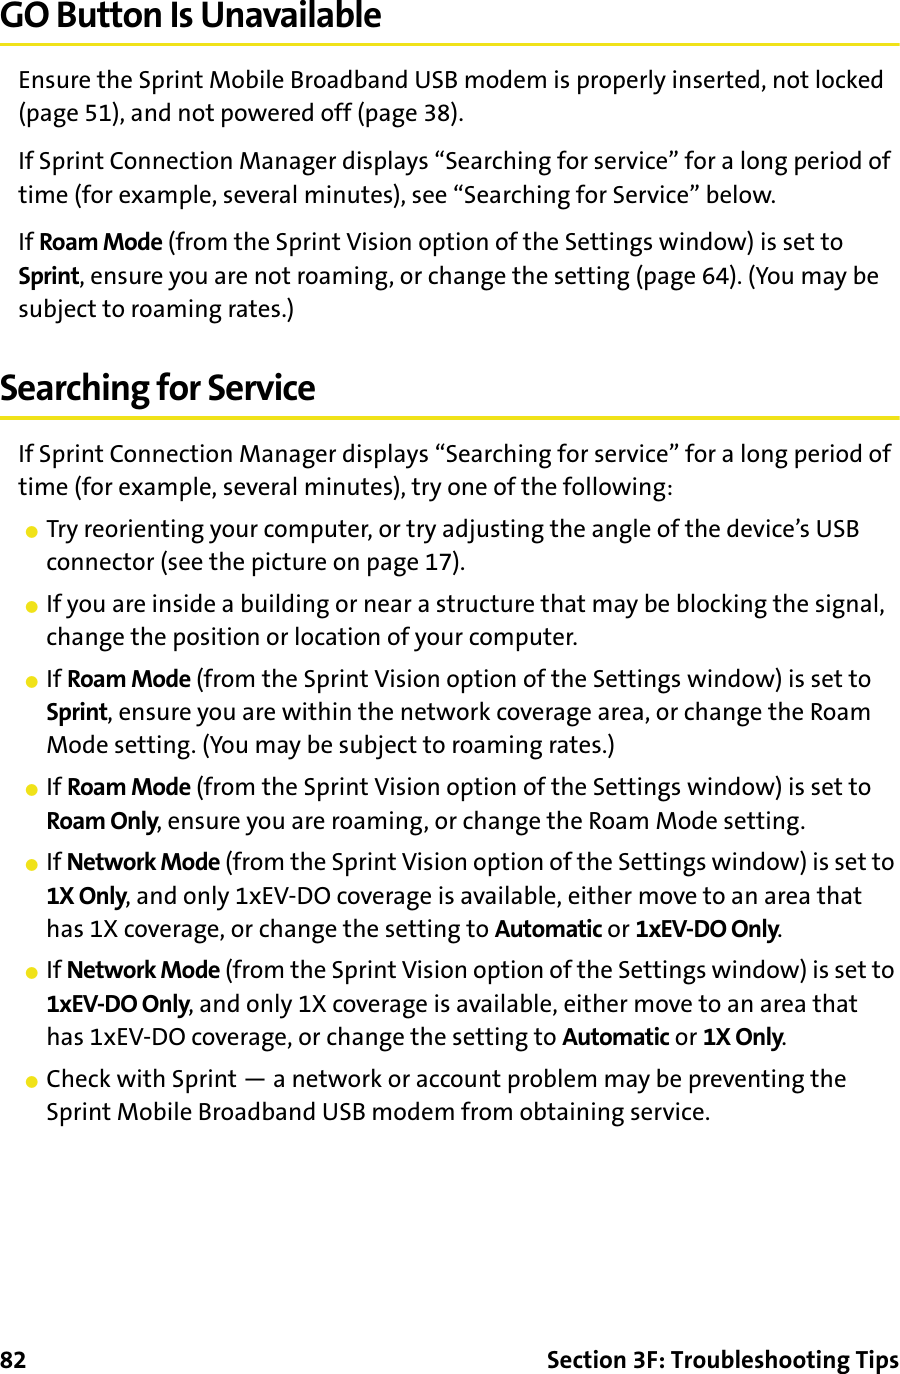 82 Section 3F: Troubleshooting TipsGO Button Is UnavailableEnsure the Sprint Mobile Broadband USB modem is properly inserted, not locked (page 51), and not powered off (page 38).If Sprint Connection Manager displays “Searching for service” for a long period of time (for example, several minutes), see “Searching for Service” below.If Roam Mode (from the Sprint Vision option of the Settings window) is set to Sprint, ensure you are not roaming, or change the setting (page 64). (You may be subject to roaming rates.)Searching for ServiceIf Sprint Connection Manager displays “Searching for service” for a long period of time (for example, several minutes), try one of the following: 䢇Try reorienting your computer, or try adjusting the angle of the device’s USB connector (see the picture on page 17).䢇If you are inside a building or near a structure that may be blocking the signal, change the position or location of your computer.䢇If Roam Mode (from the Sprint Vision option of the Settings window) is set to Sprint, ensure you are within the network coverage area, or change the Roam Mode setting. (You may be subject to roaming rates.)䢇If Roam Mode (from the Sprint Vision option of the Settings window) is set to Roam Only, ensure you are roaming, or change the Roam Mode setting.䢇If Network Mode (from the Sprint Vision option of the Settings window) is set to 1X Only, and only 1xEV-DO coverage is available, either move to an area that has 1X coverage, or change the setting to Automatic or 1xEV-DO Only.䢇If Network Mode (from the Sprint Vision option of the Settings window) is set to 1xEV-DO Only, and only 1X coverage is available, either move to an area that has 1xEV-DO coverage, or change the setting to Automatic or 1X Only.䢇Check with Sprint — a network or account problem may be preventing the Sprint Mobile Broadband USB modem from obtaining service.